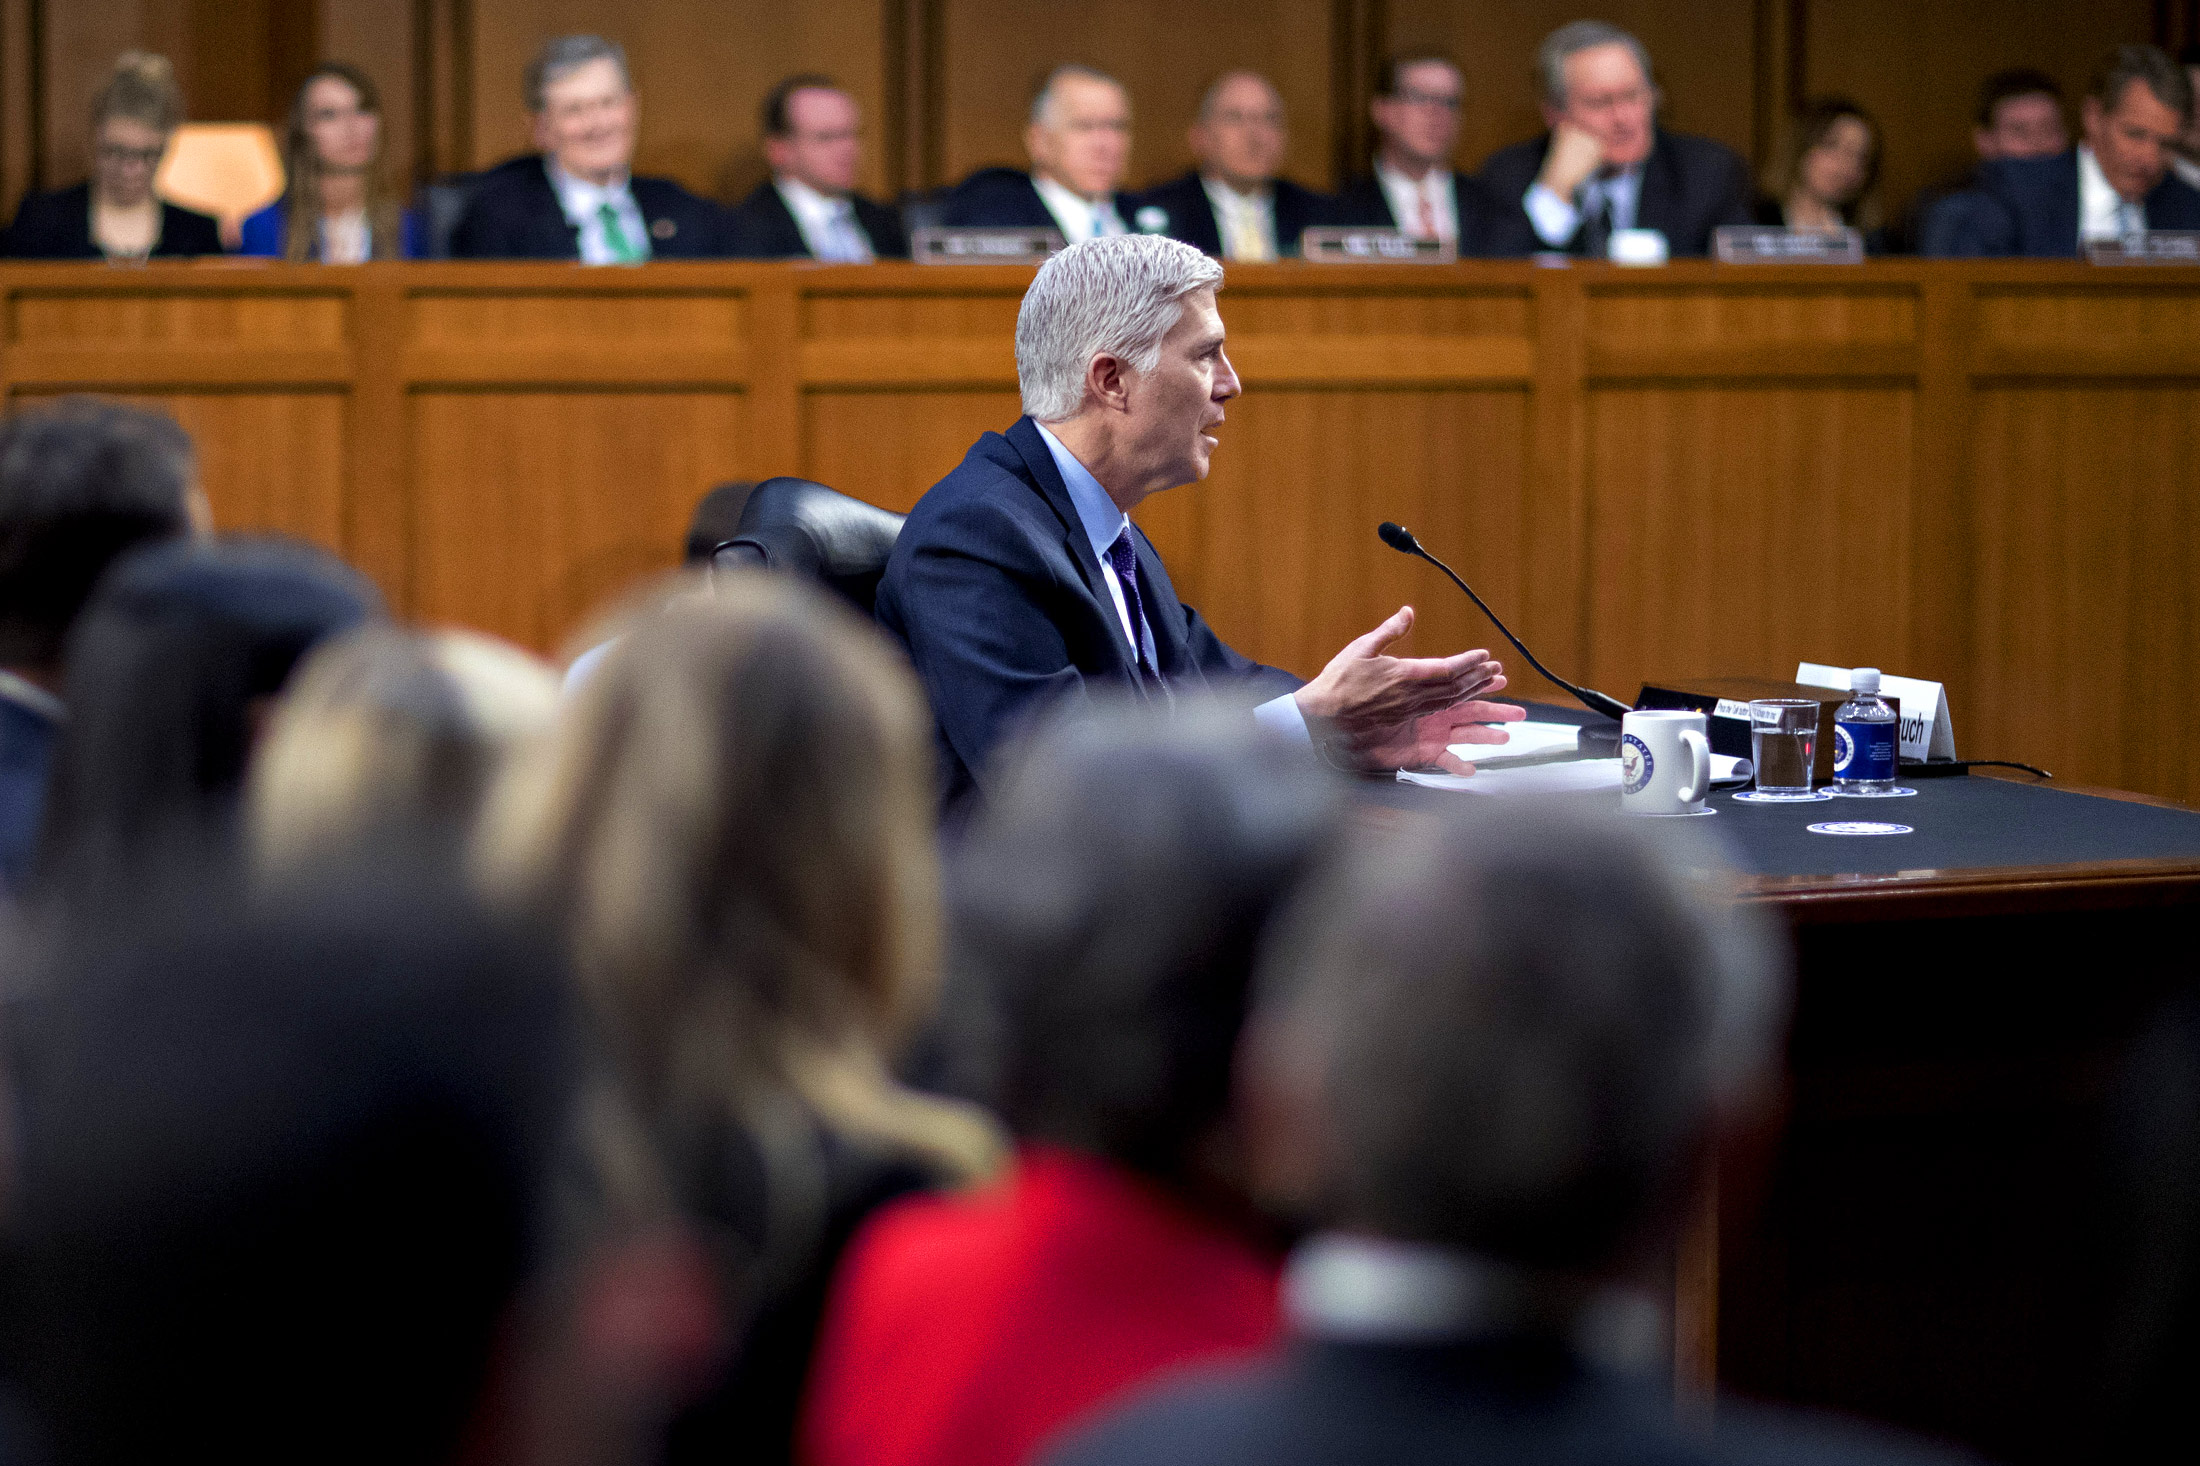 Gorsuch speaks during his confirmation hearing in Washington, D.C., on March 21, 2017.
